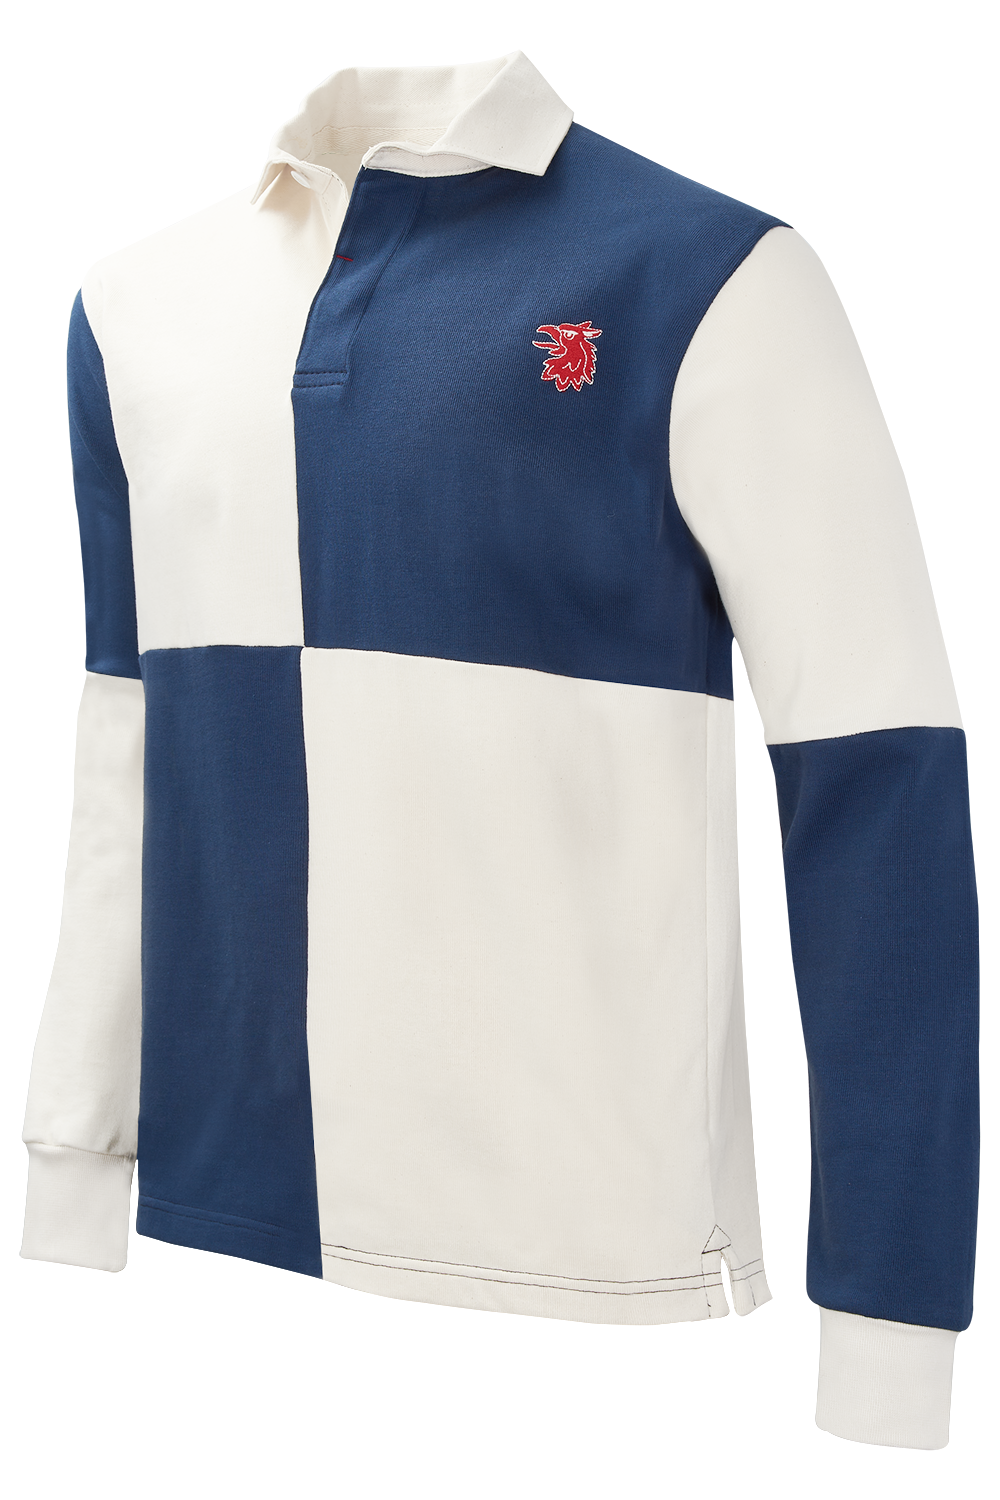 Club House Quarter - Navy/White product image - front